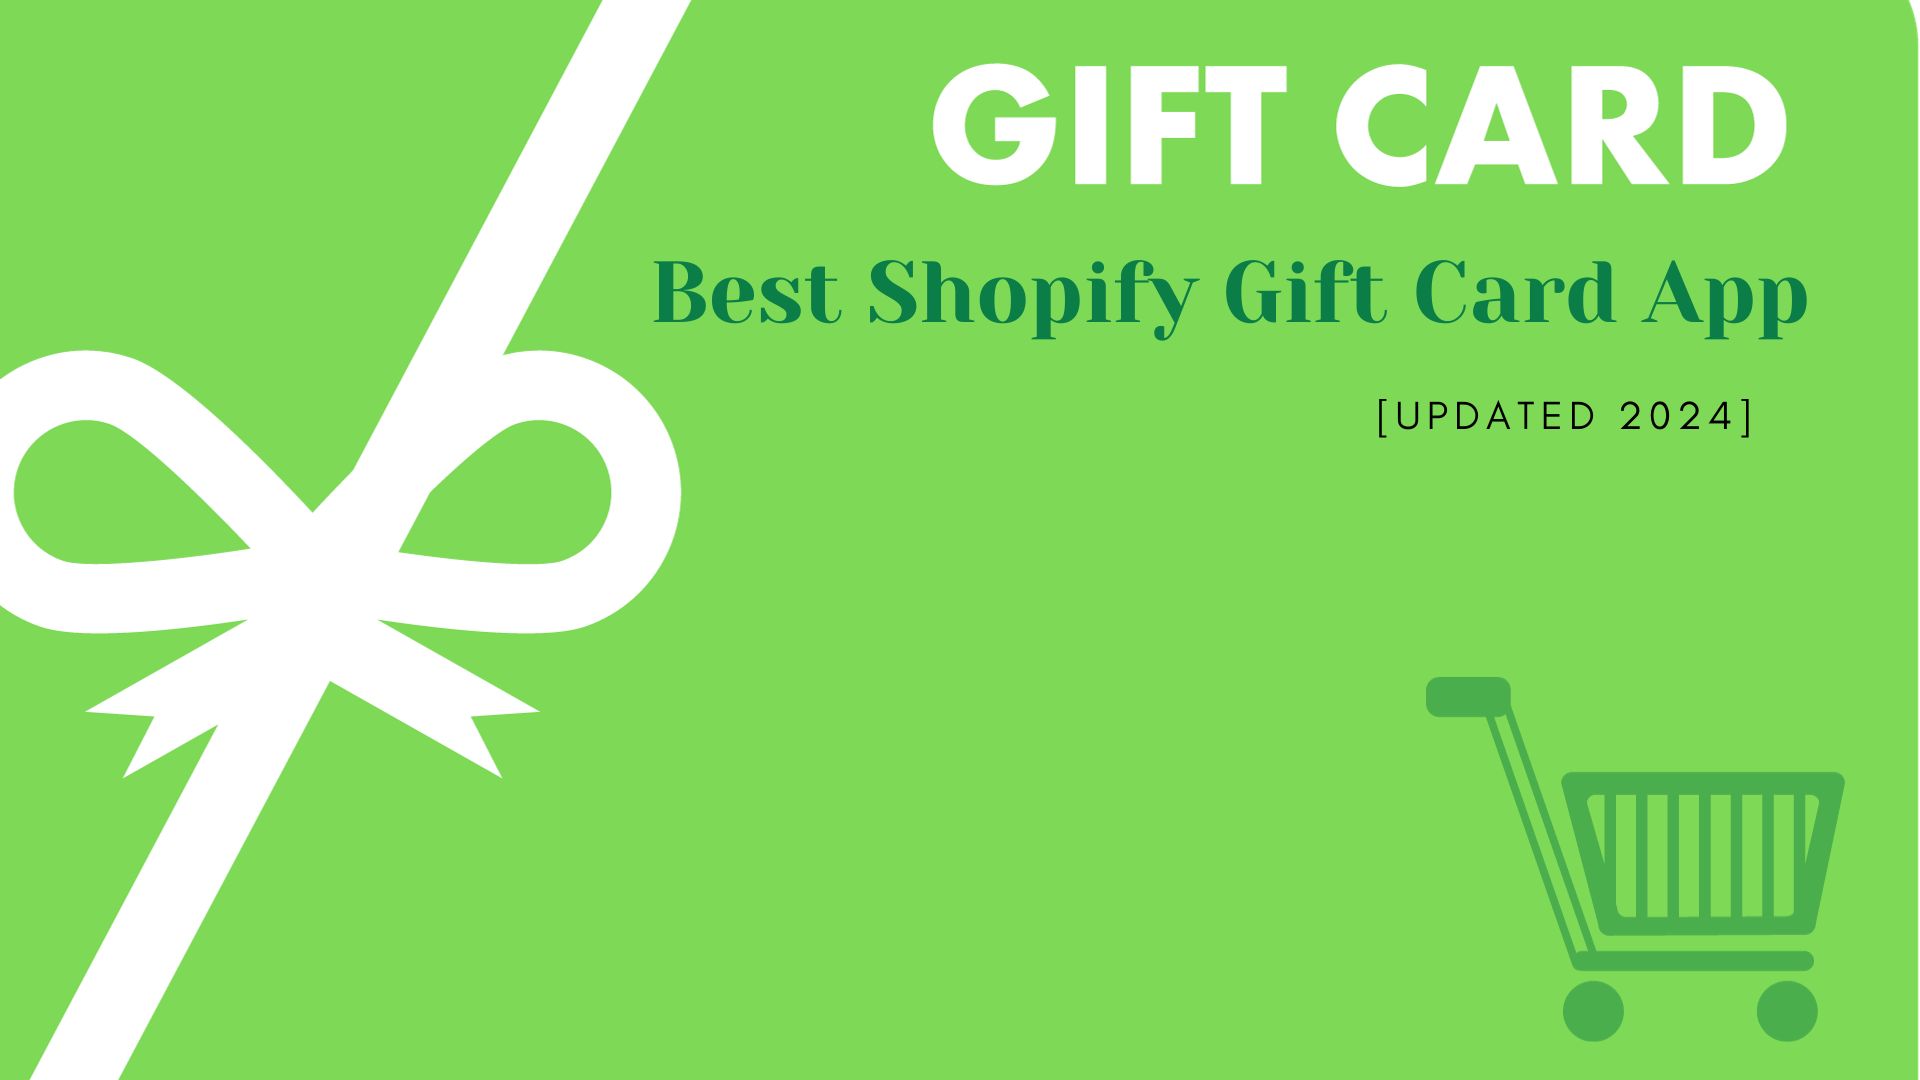 Best Gift Card Trading App In Nigeria Today, March 11, 2024.